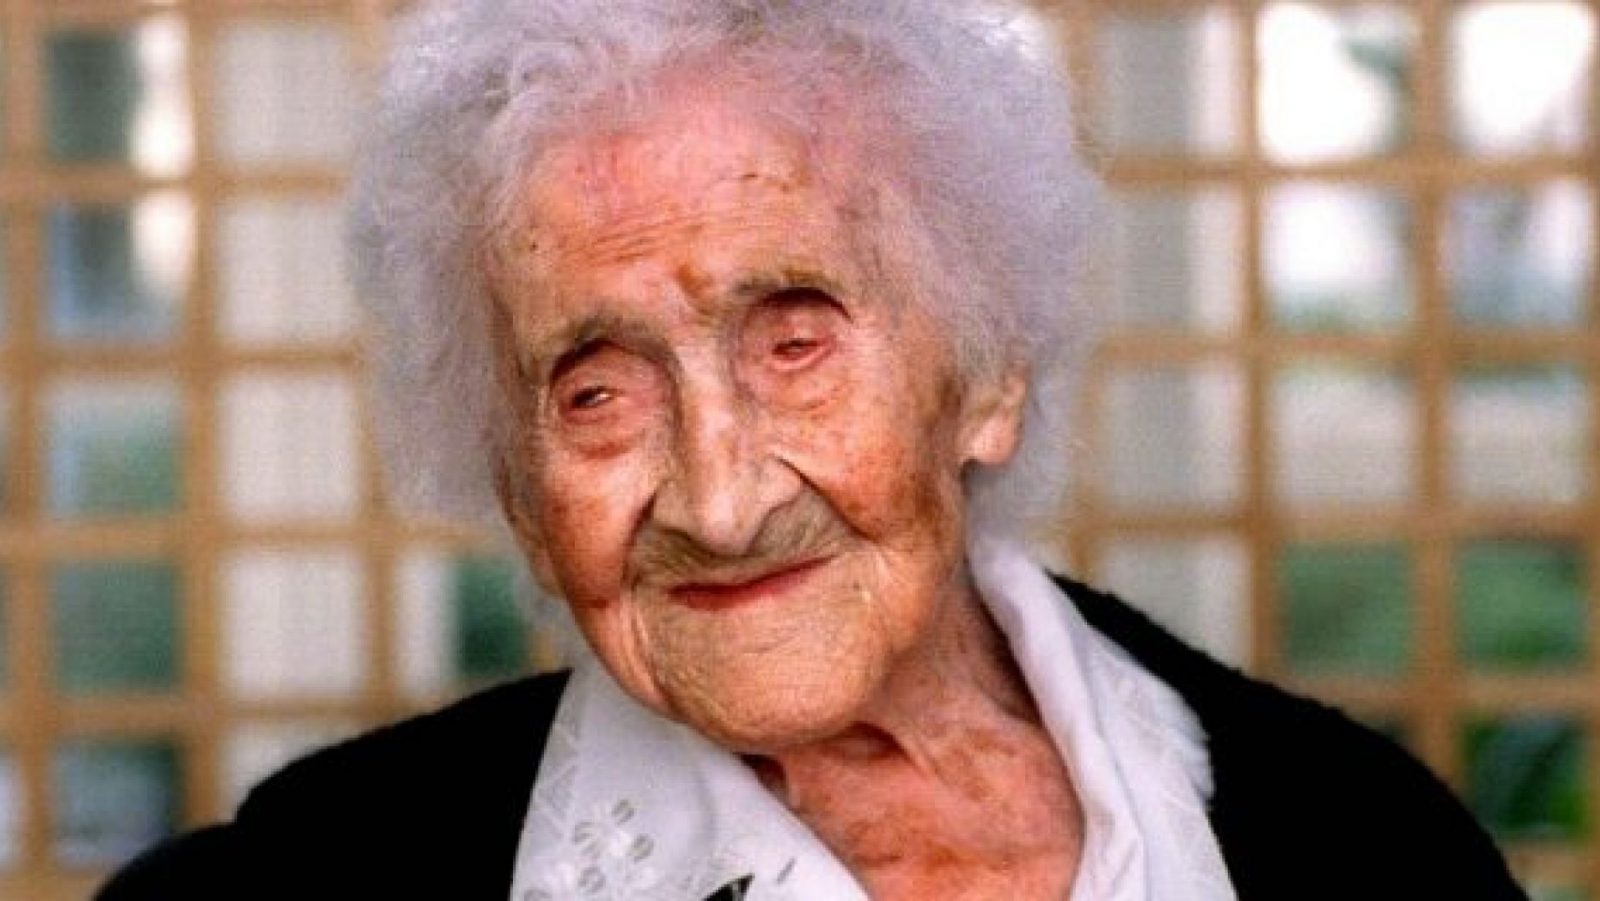 Can You Score 14/17 in This Random Knowledge Quiz? Jeanne Calment Reuters